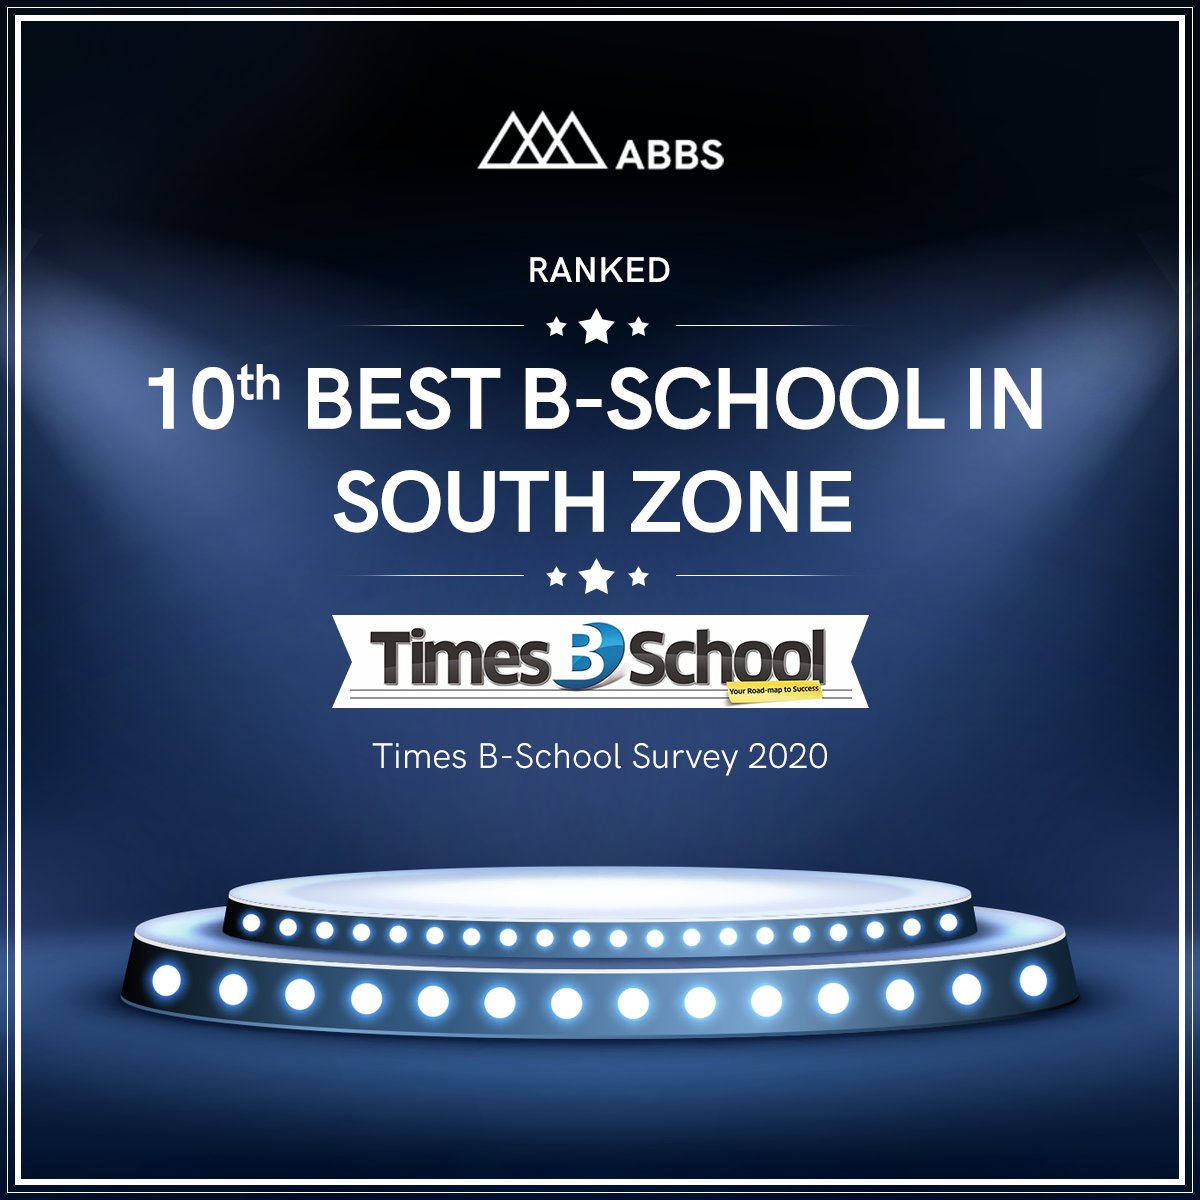 Another feather added to our cap!

#ABBS #TimesBSchoolSurvey2020 #PrivateBSchool #BestBSchoolSouthZone #BSchoolRanking #Ranking